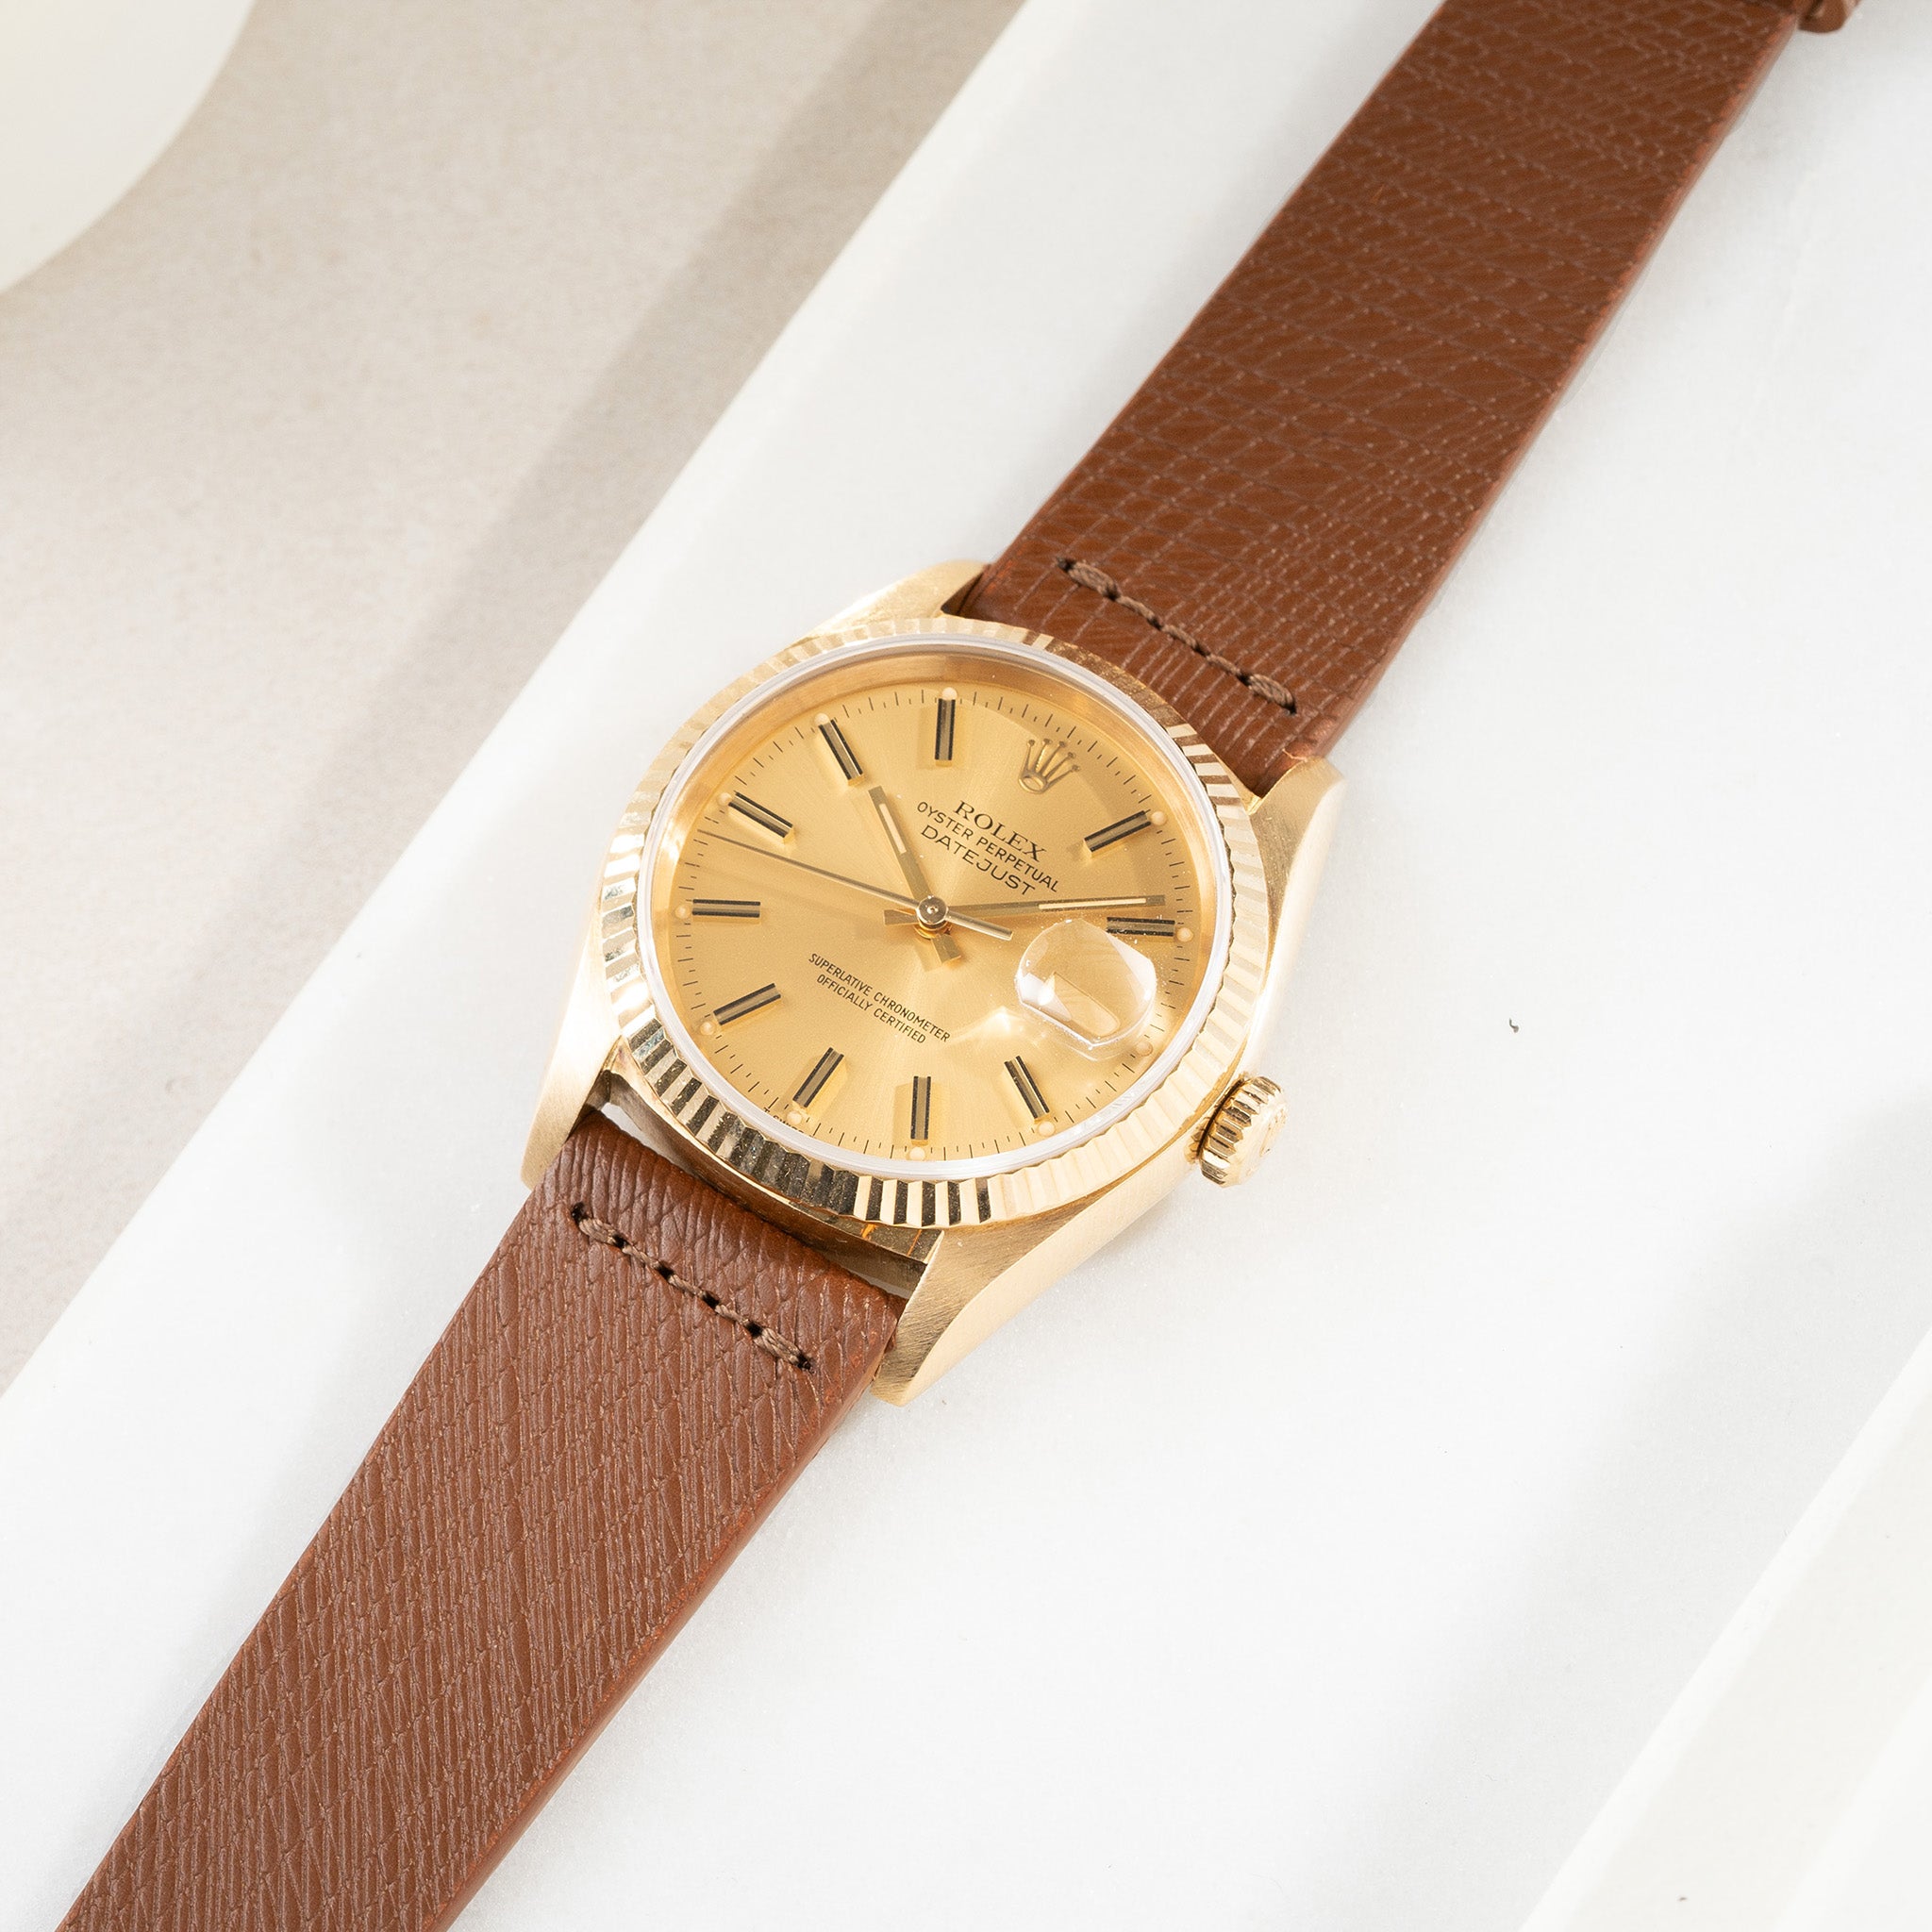 Luxury_Cocolate_Brown_Leather_Watch_Strap_Rolex_Datejust_Yellow_Gold_16018